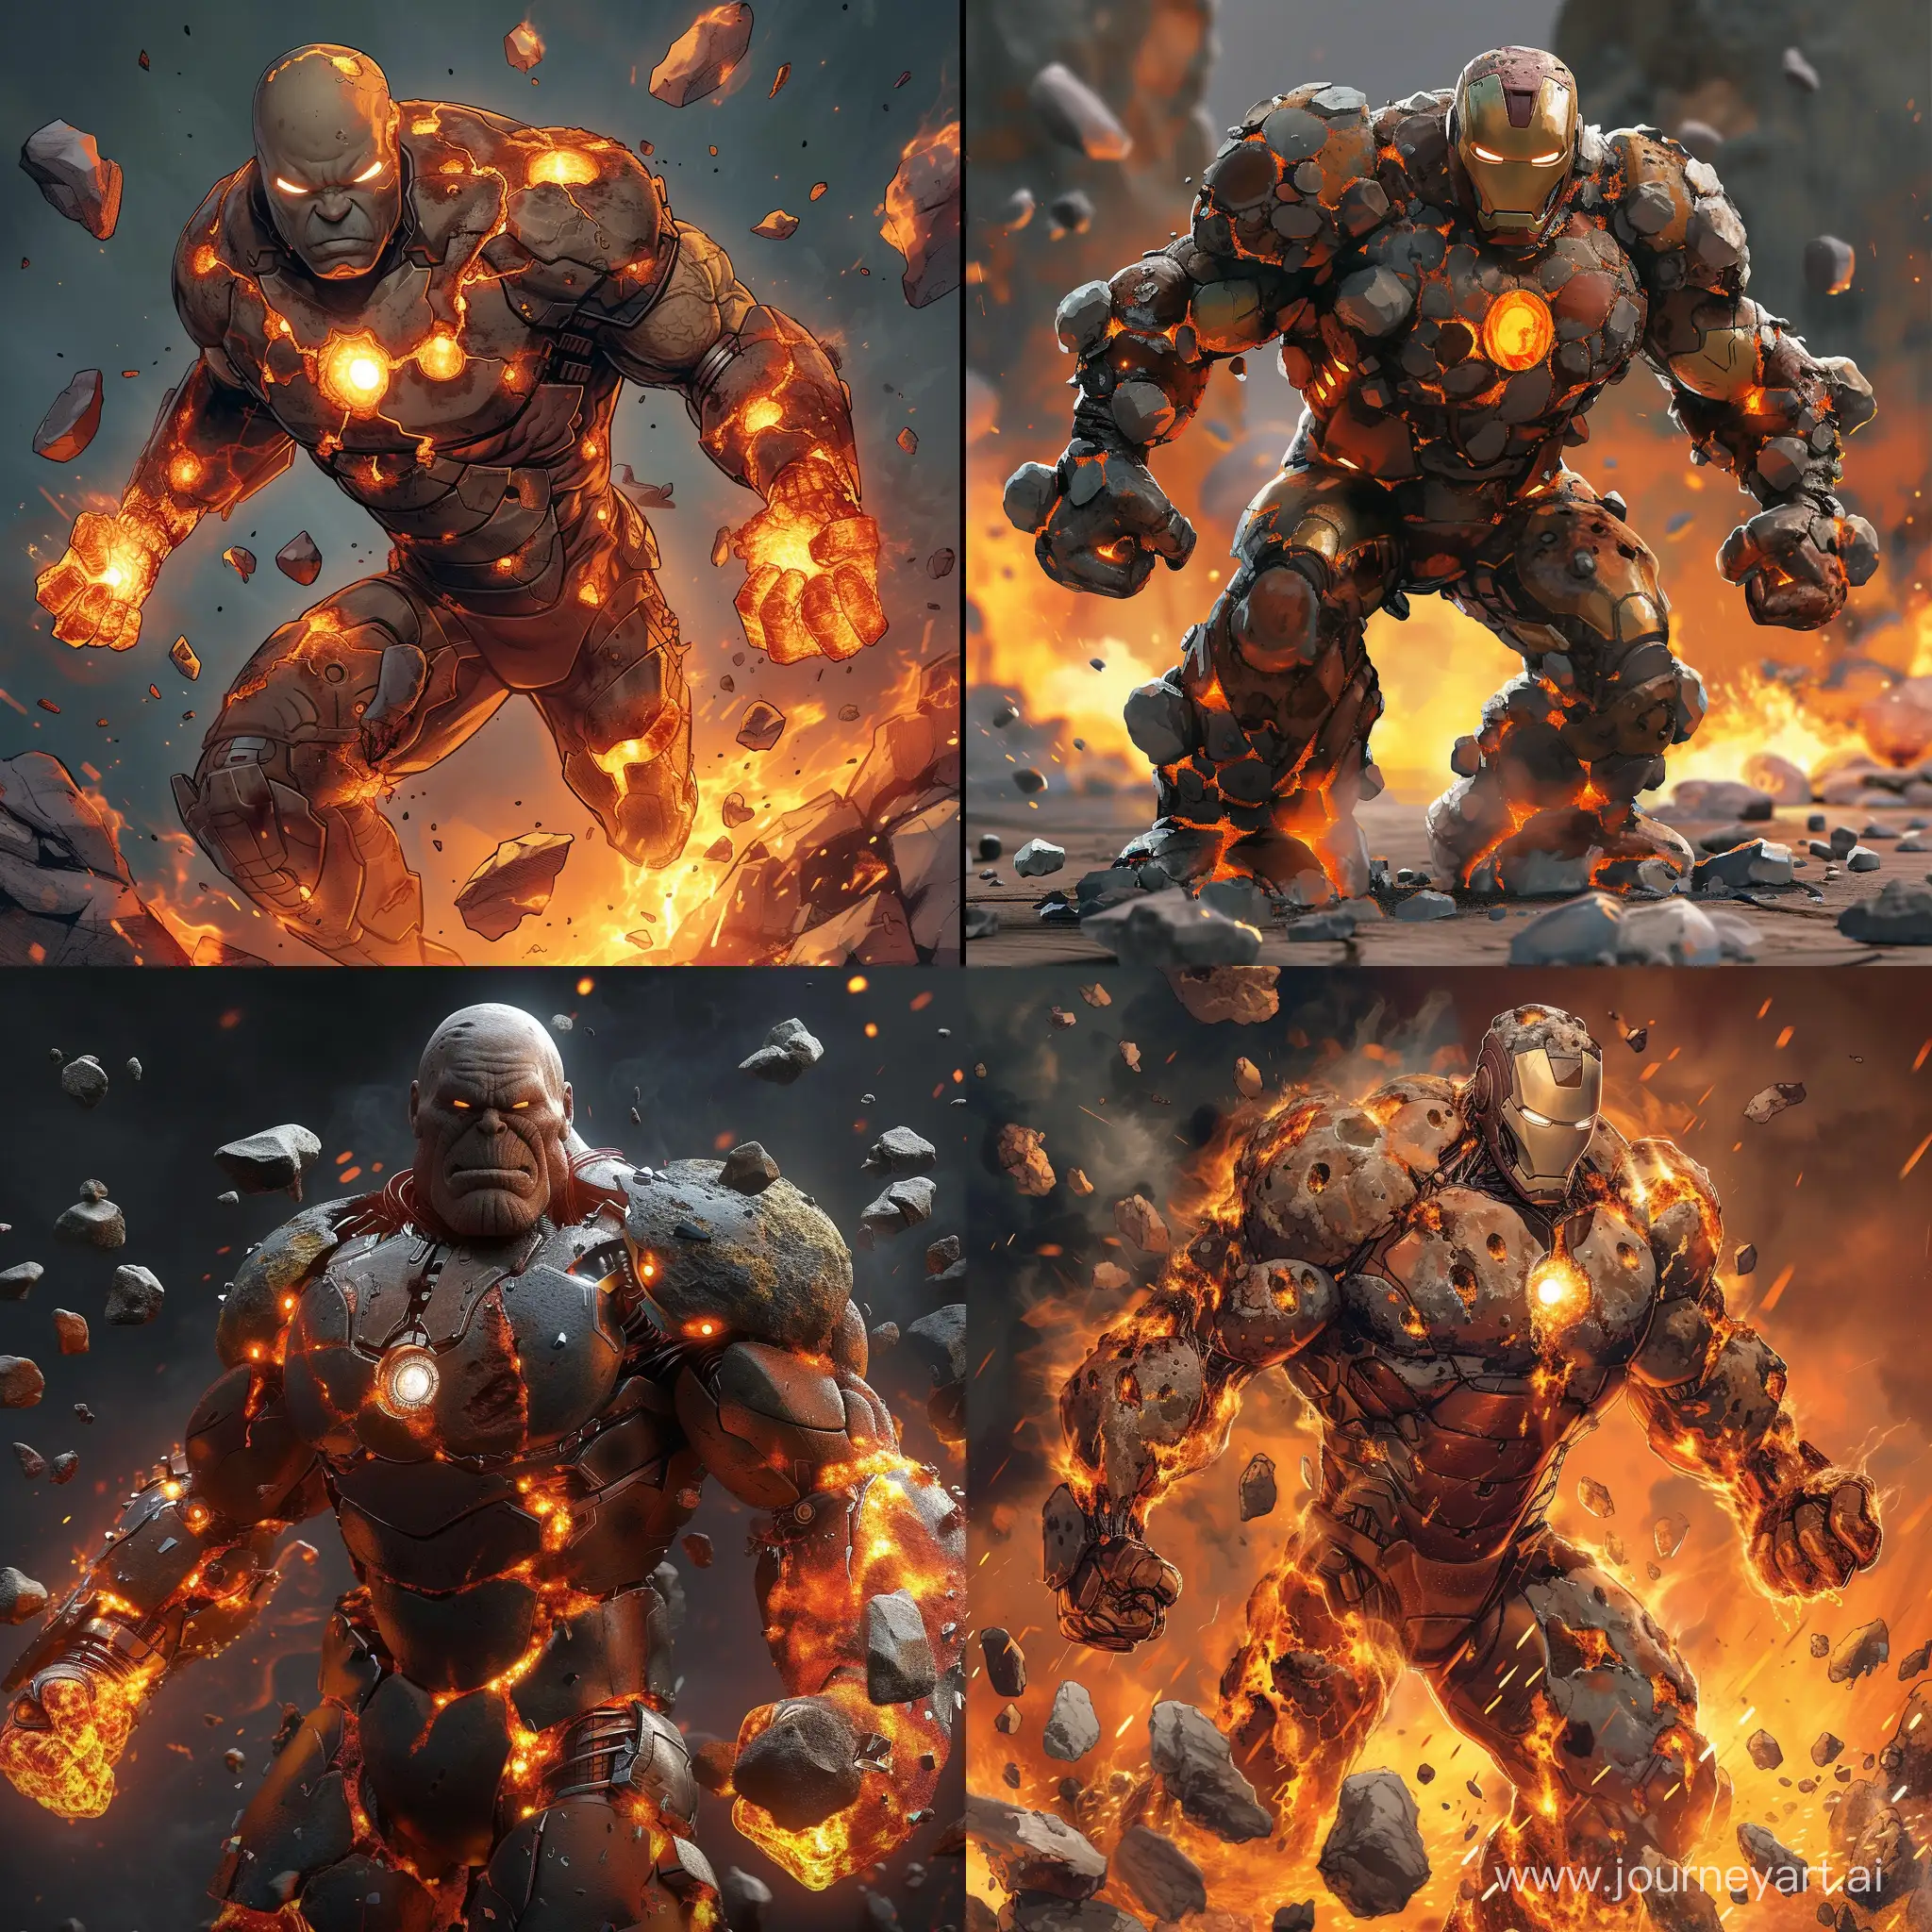 Huld he has lava powers and a nano tech iron man suit with rocks and he is angryyy